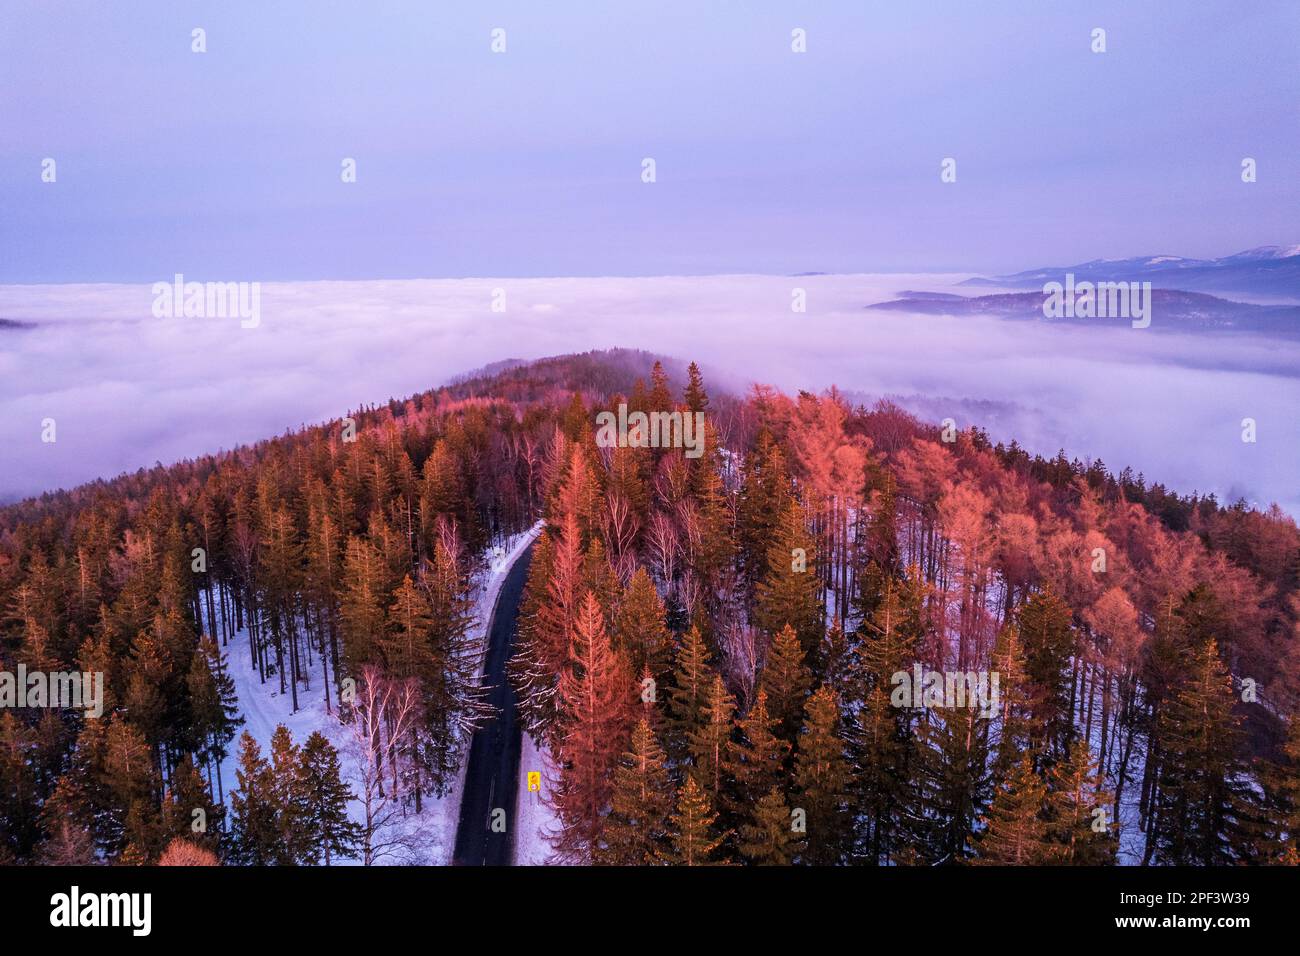 Aerial view of sunrise in Karkonosze mountains during winter Stock Photo